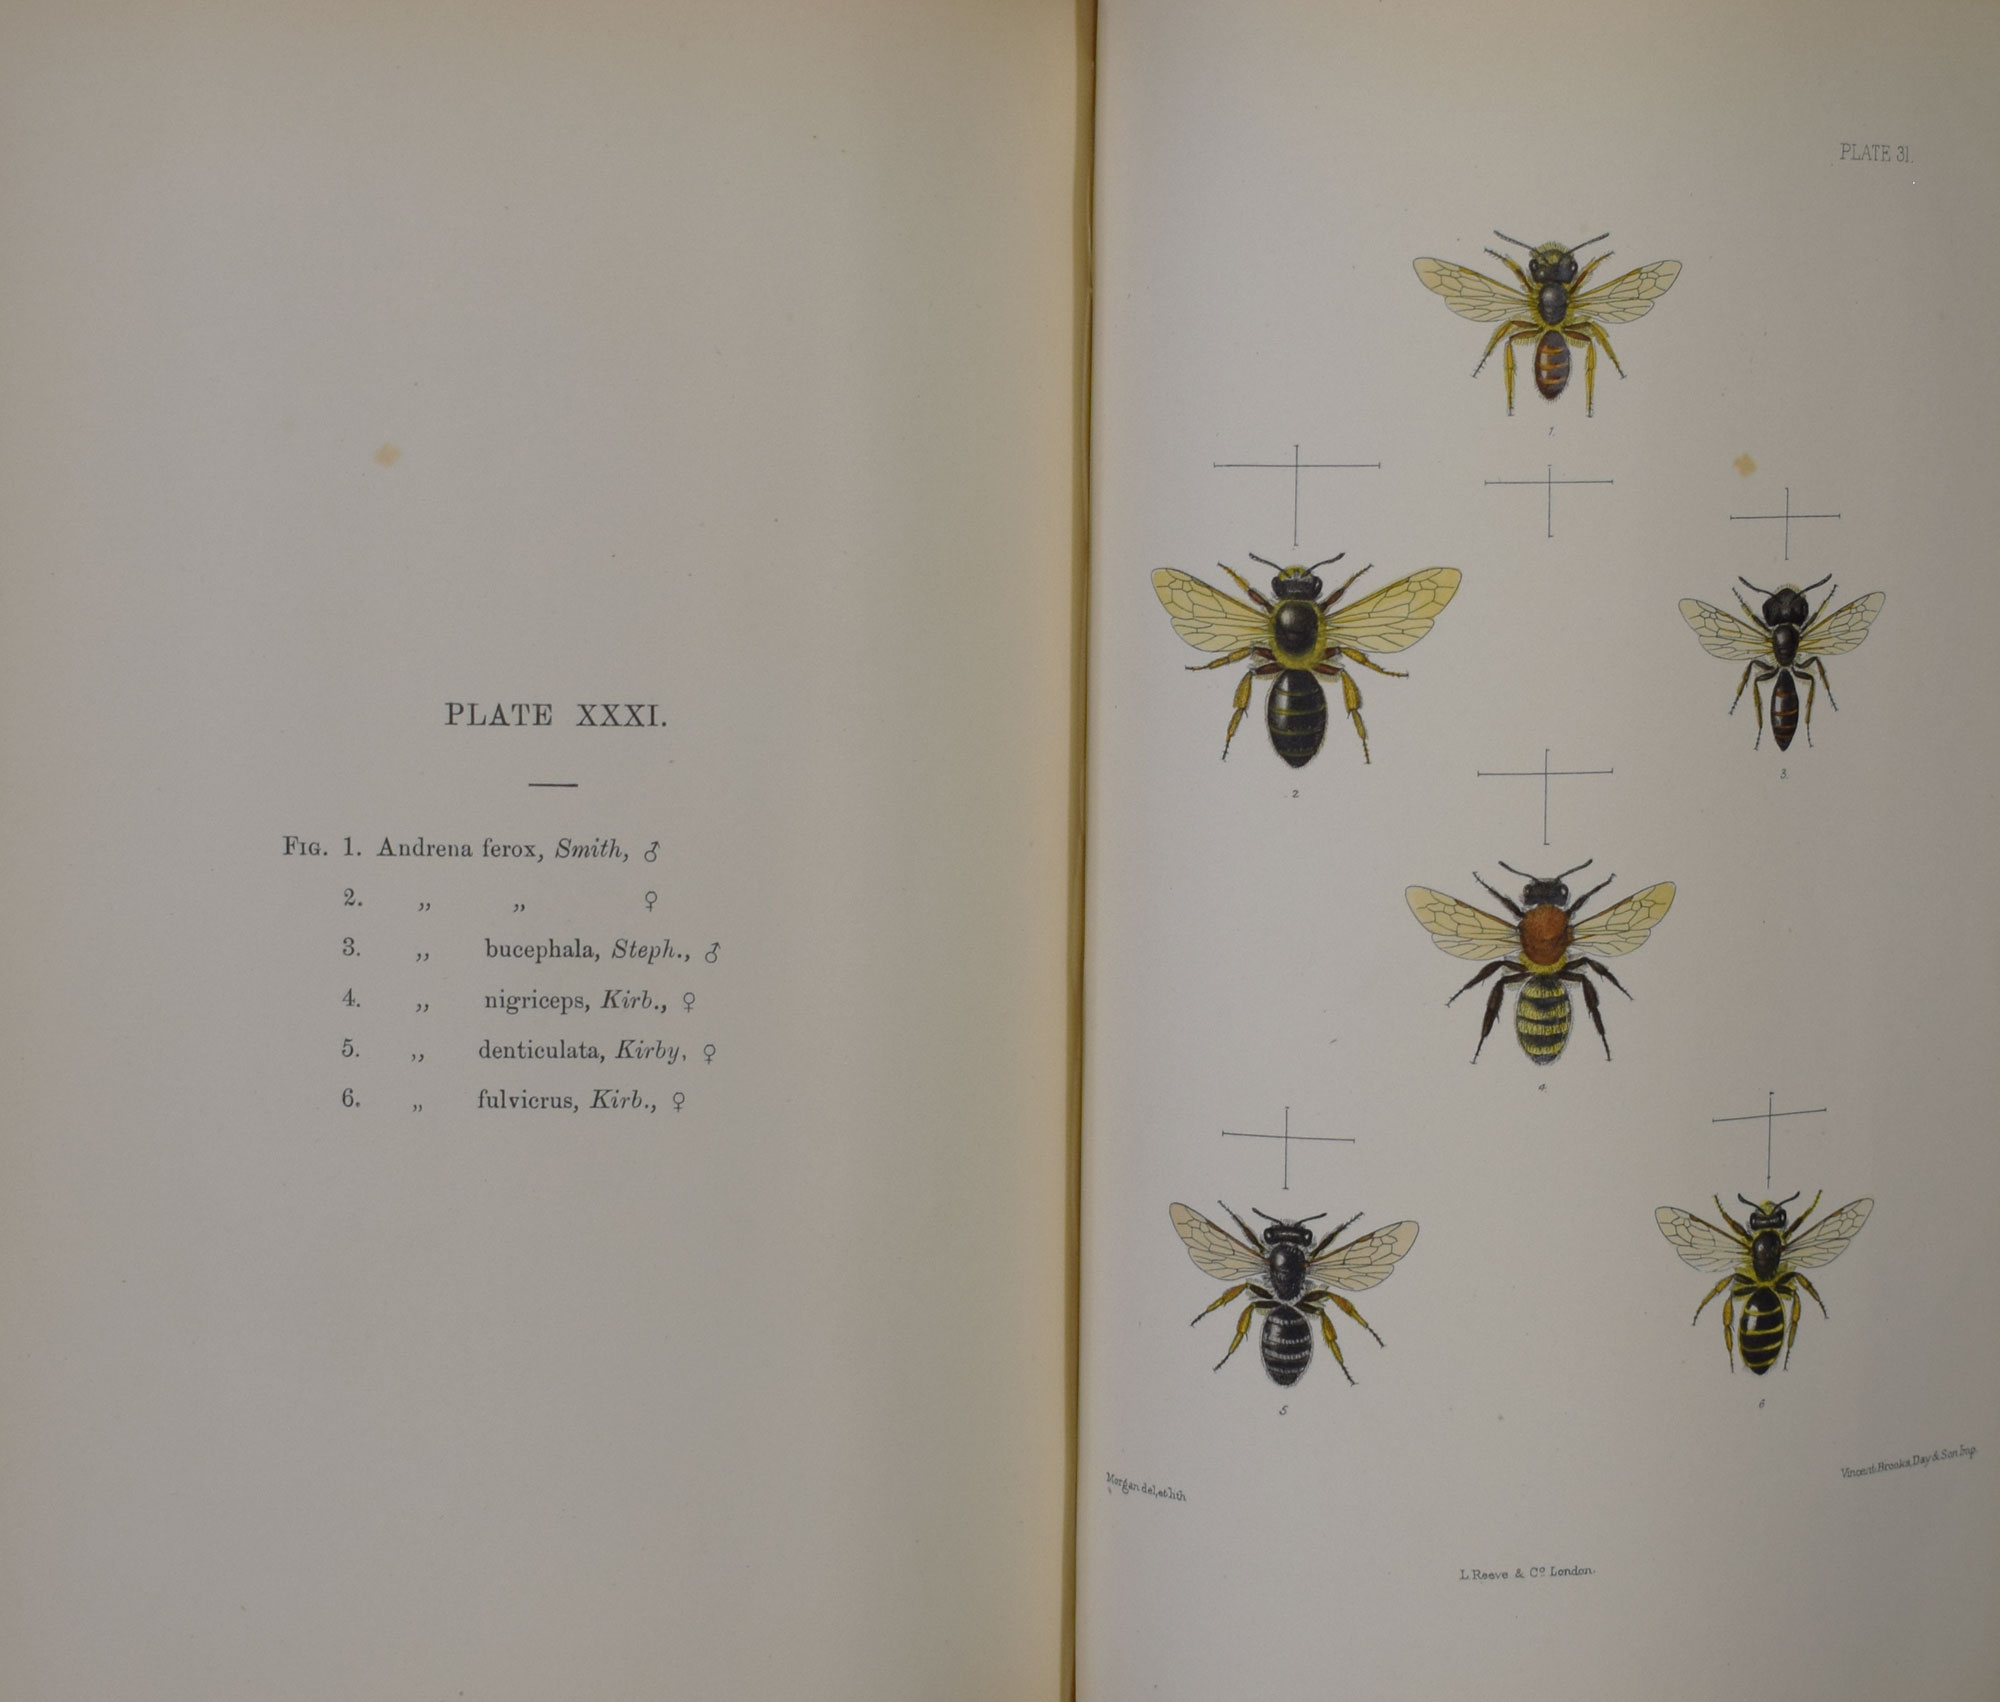 The Hymenoptera Aculeata of the British Islands. A Descriptive Account of the Families, Genera, and Species Indigenous to Great Britain and Ireland, with Notes as to Habits, Localities, Habitats, etc. Colour plate edition.